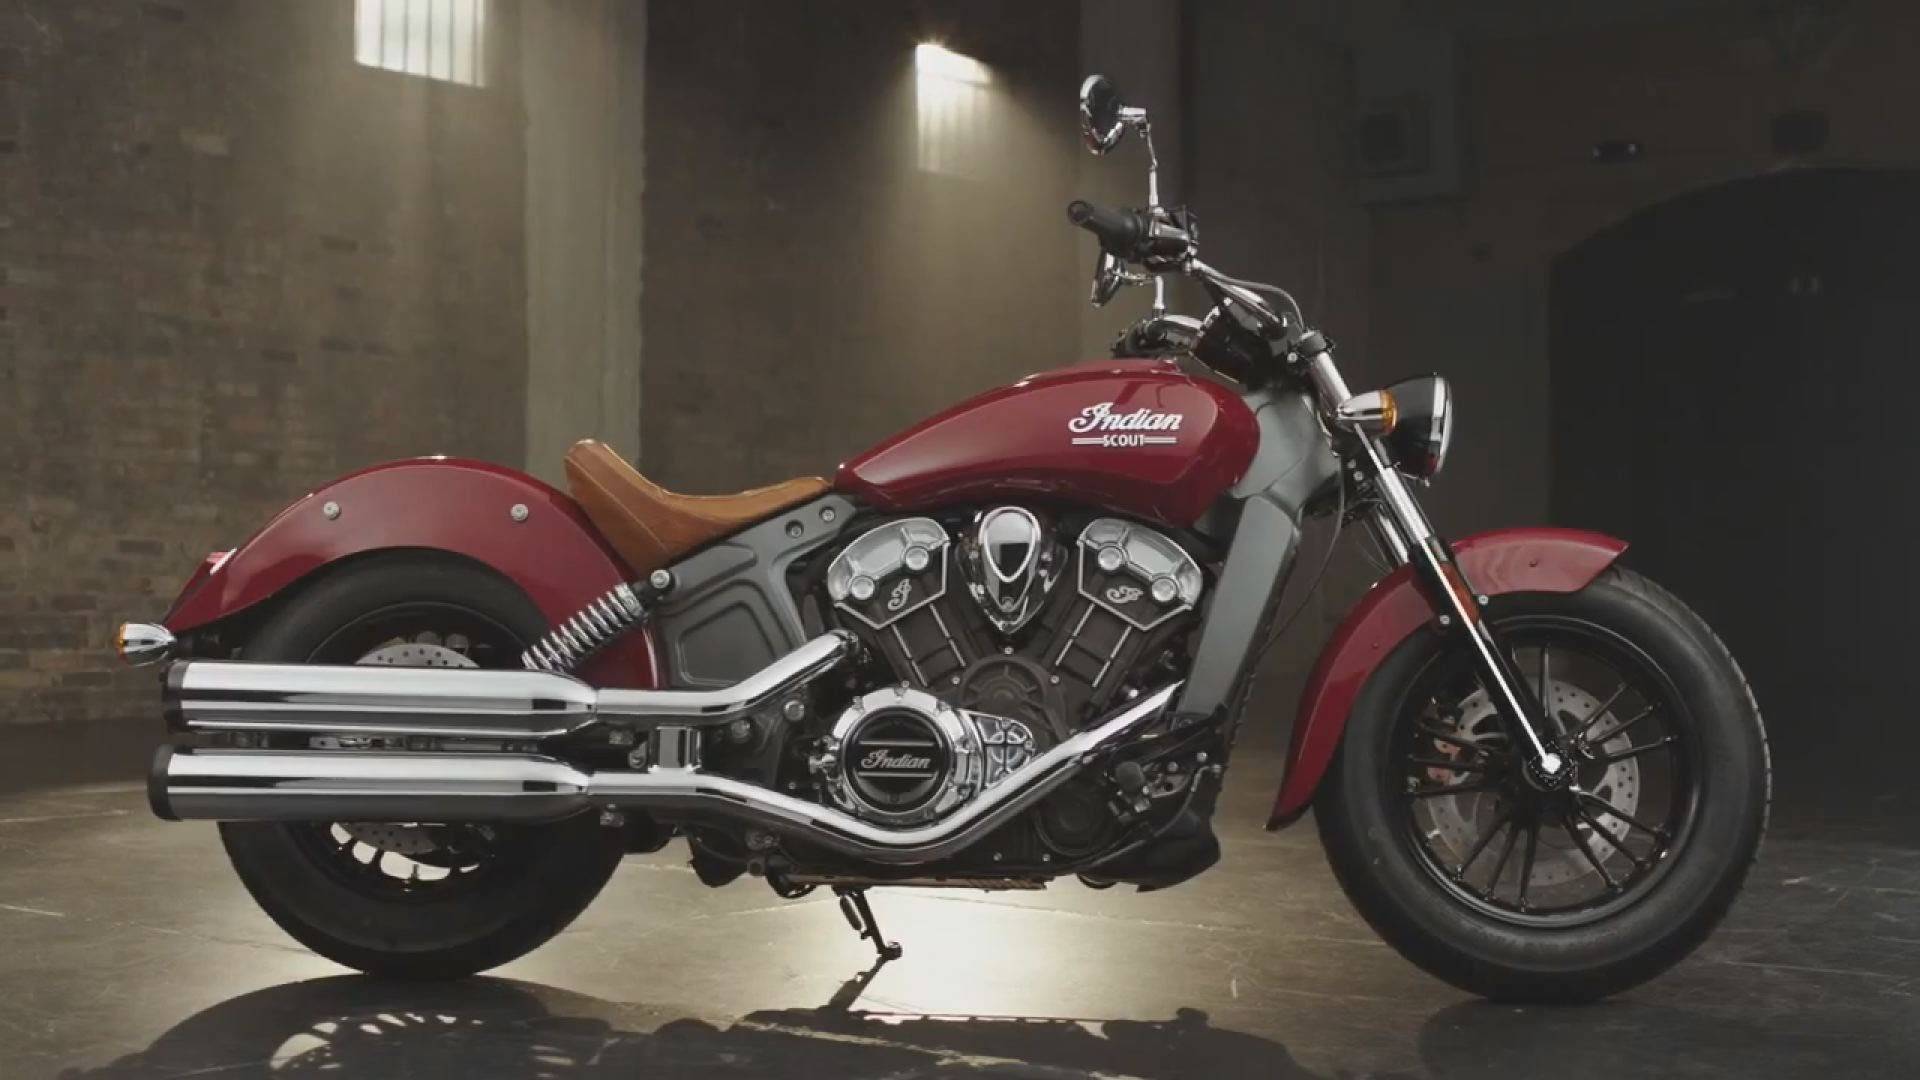 2022 indian scout [specs, features, photos] | wbw